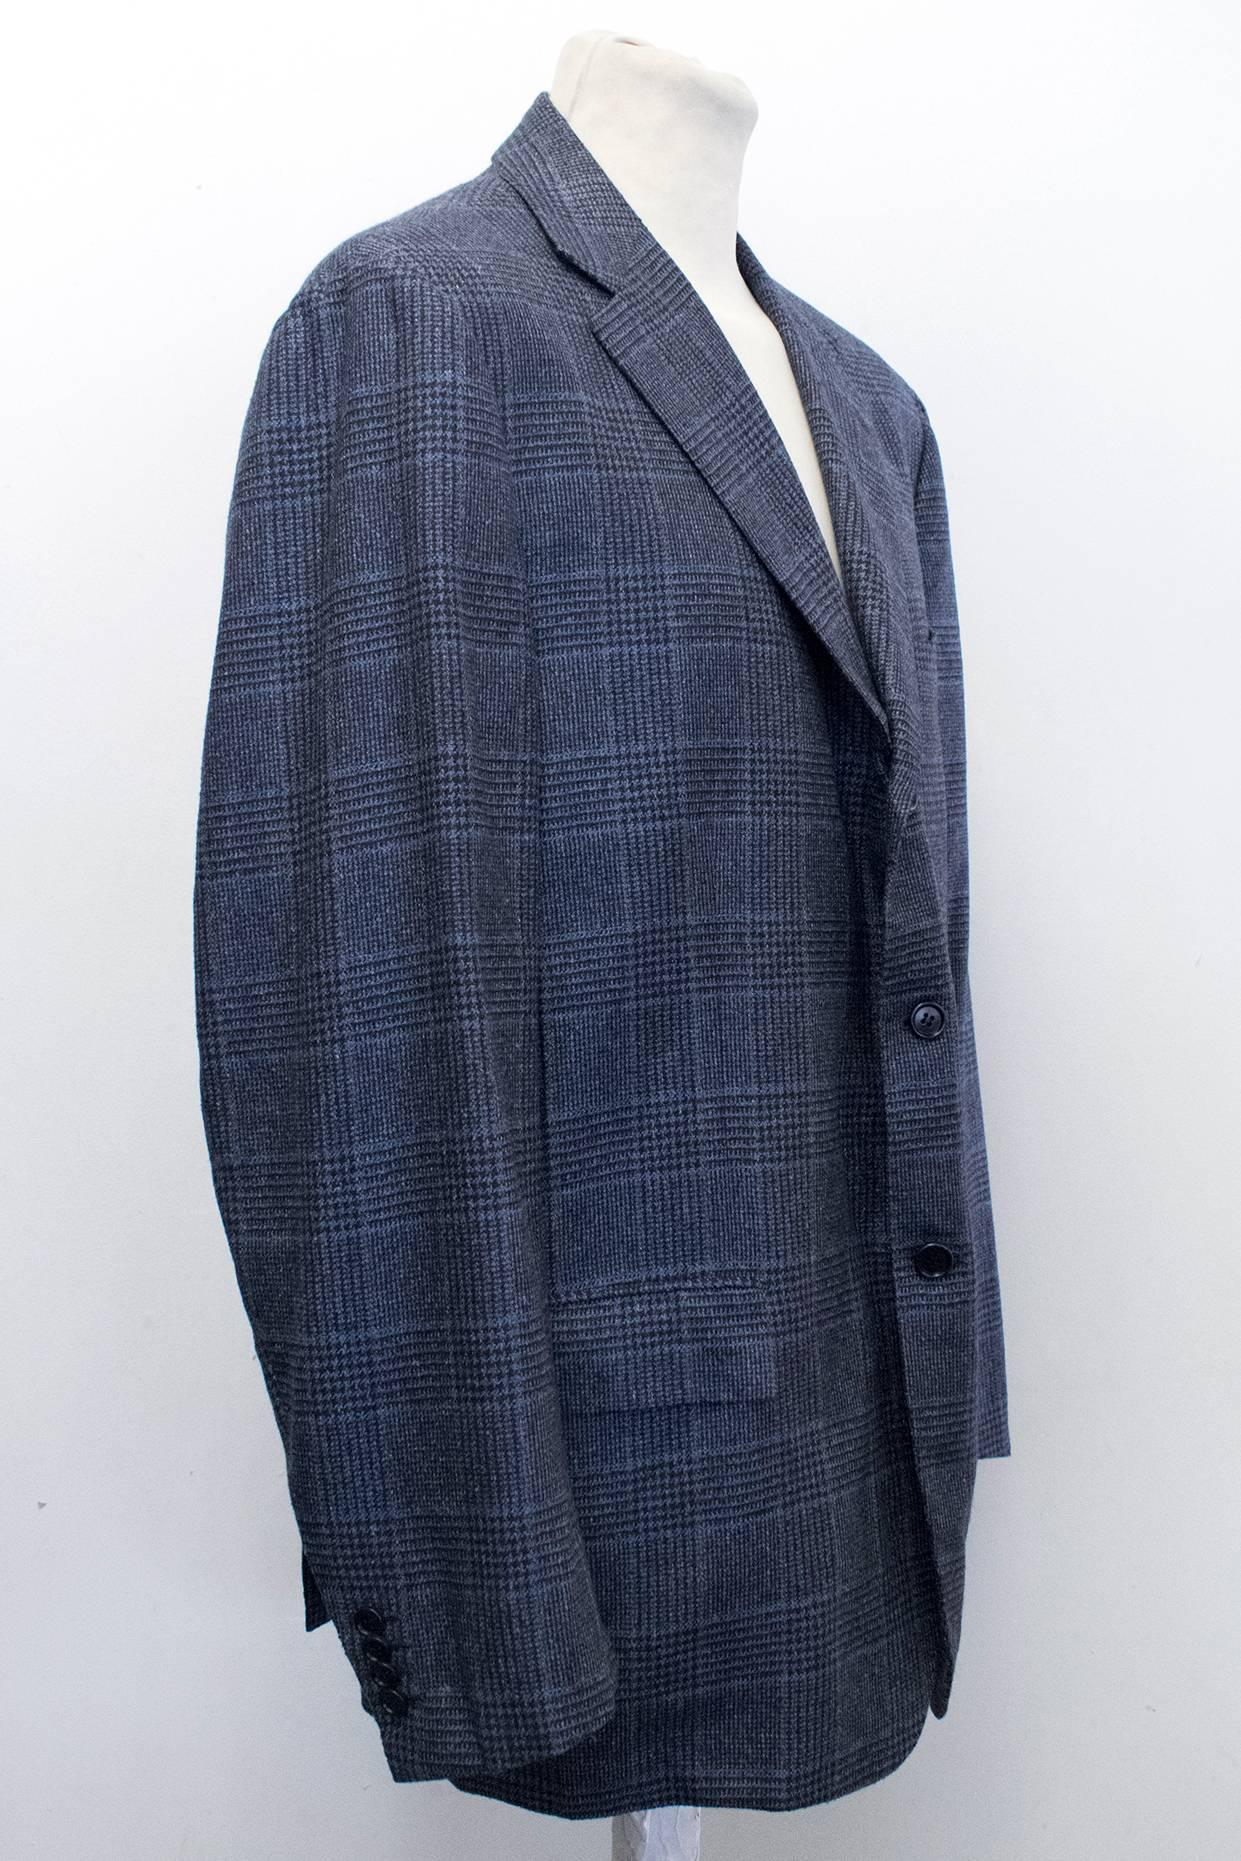 Kiton for Jean Jacques Men's Blue and Black Checked Jacket Size XXL EU 58 In Excellent Condition For Sale In London, GB